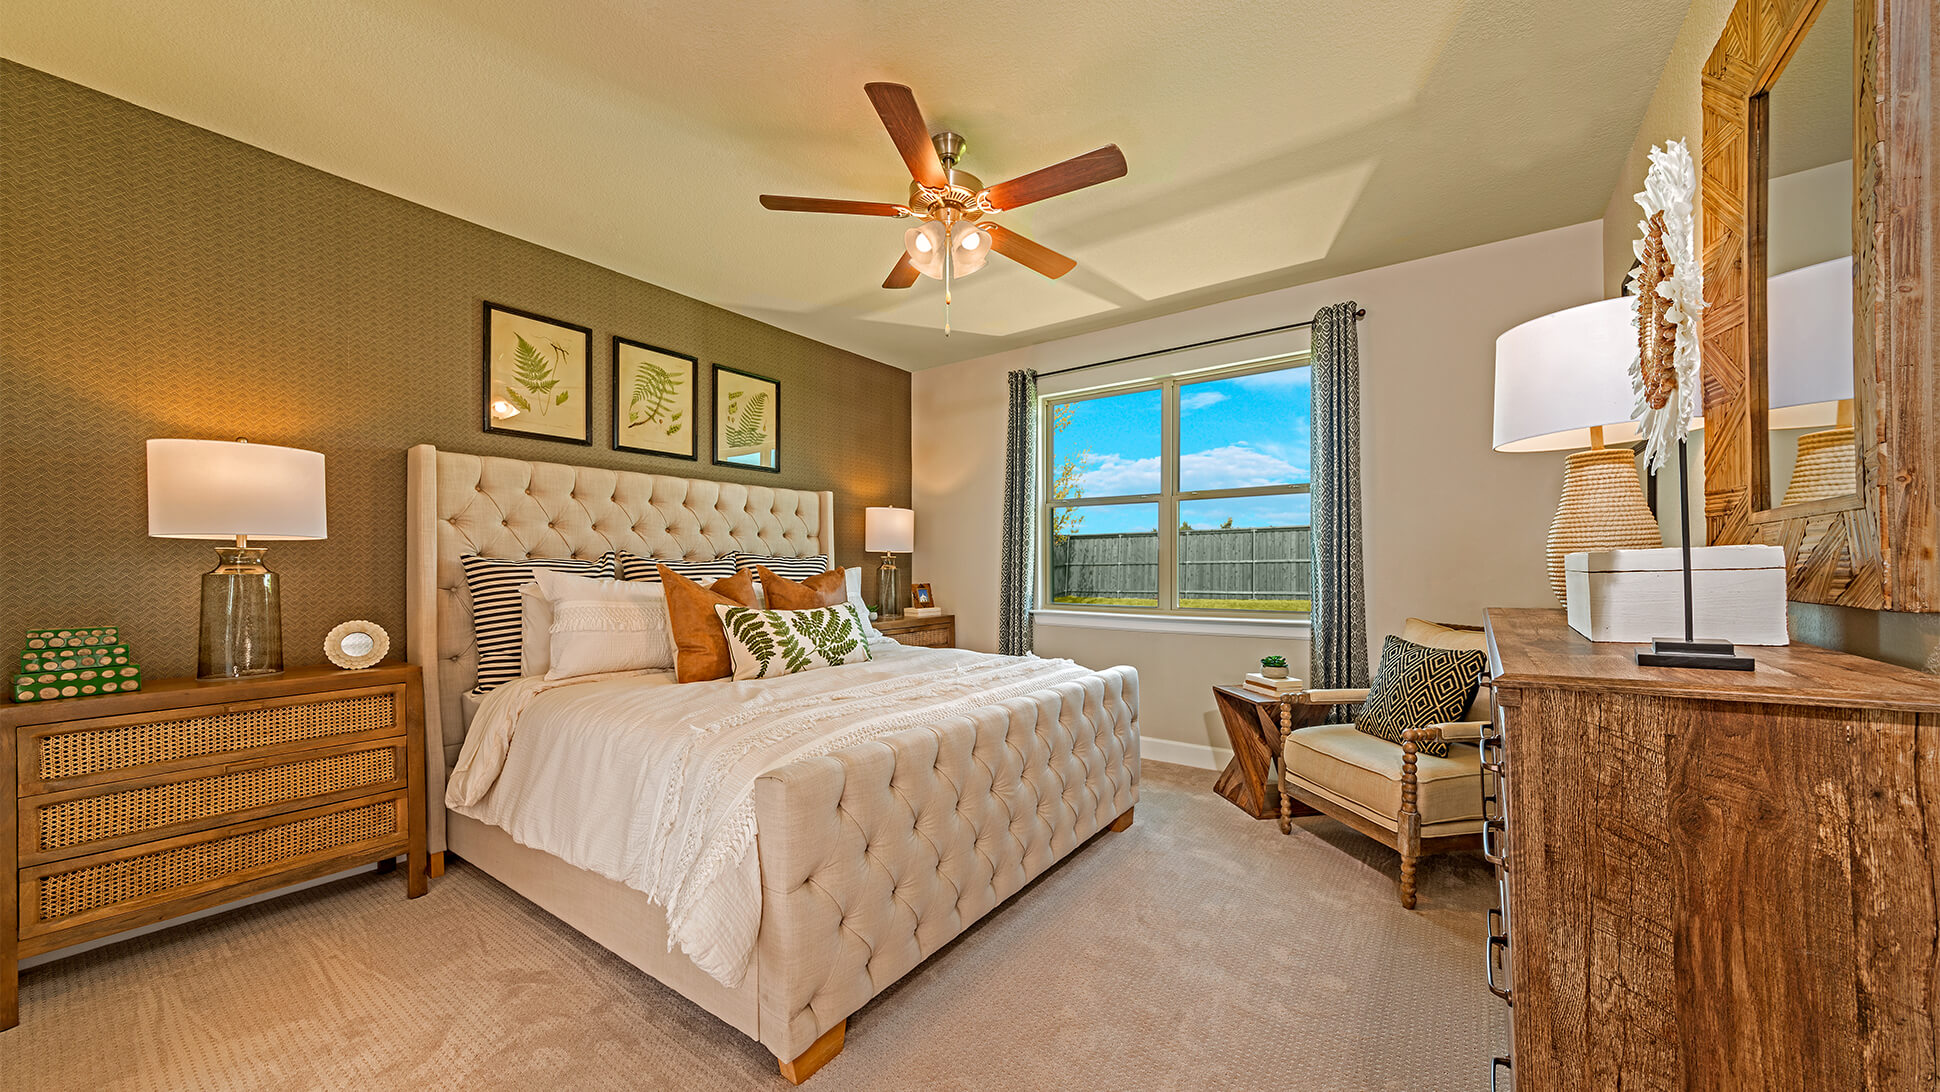 Bright and cozy bedroom in a new home in Mansfield, TX, with a neatly made bed, warm lighting, and a view of the outdoors.